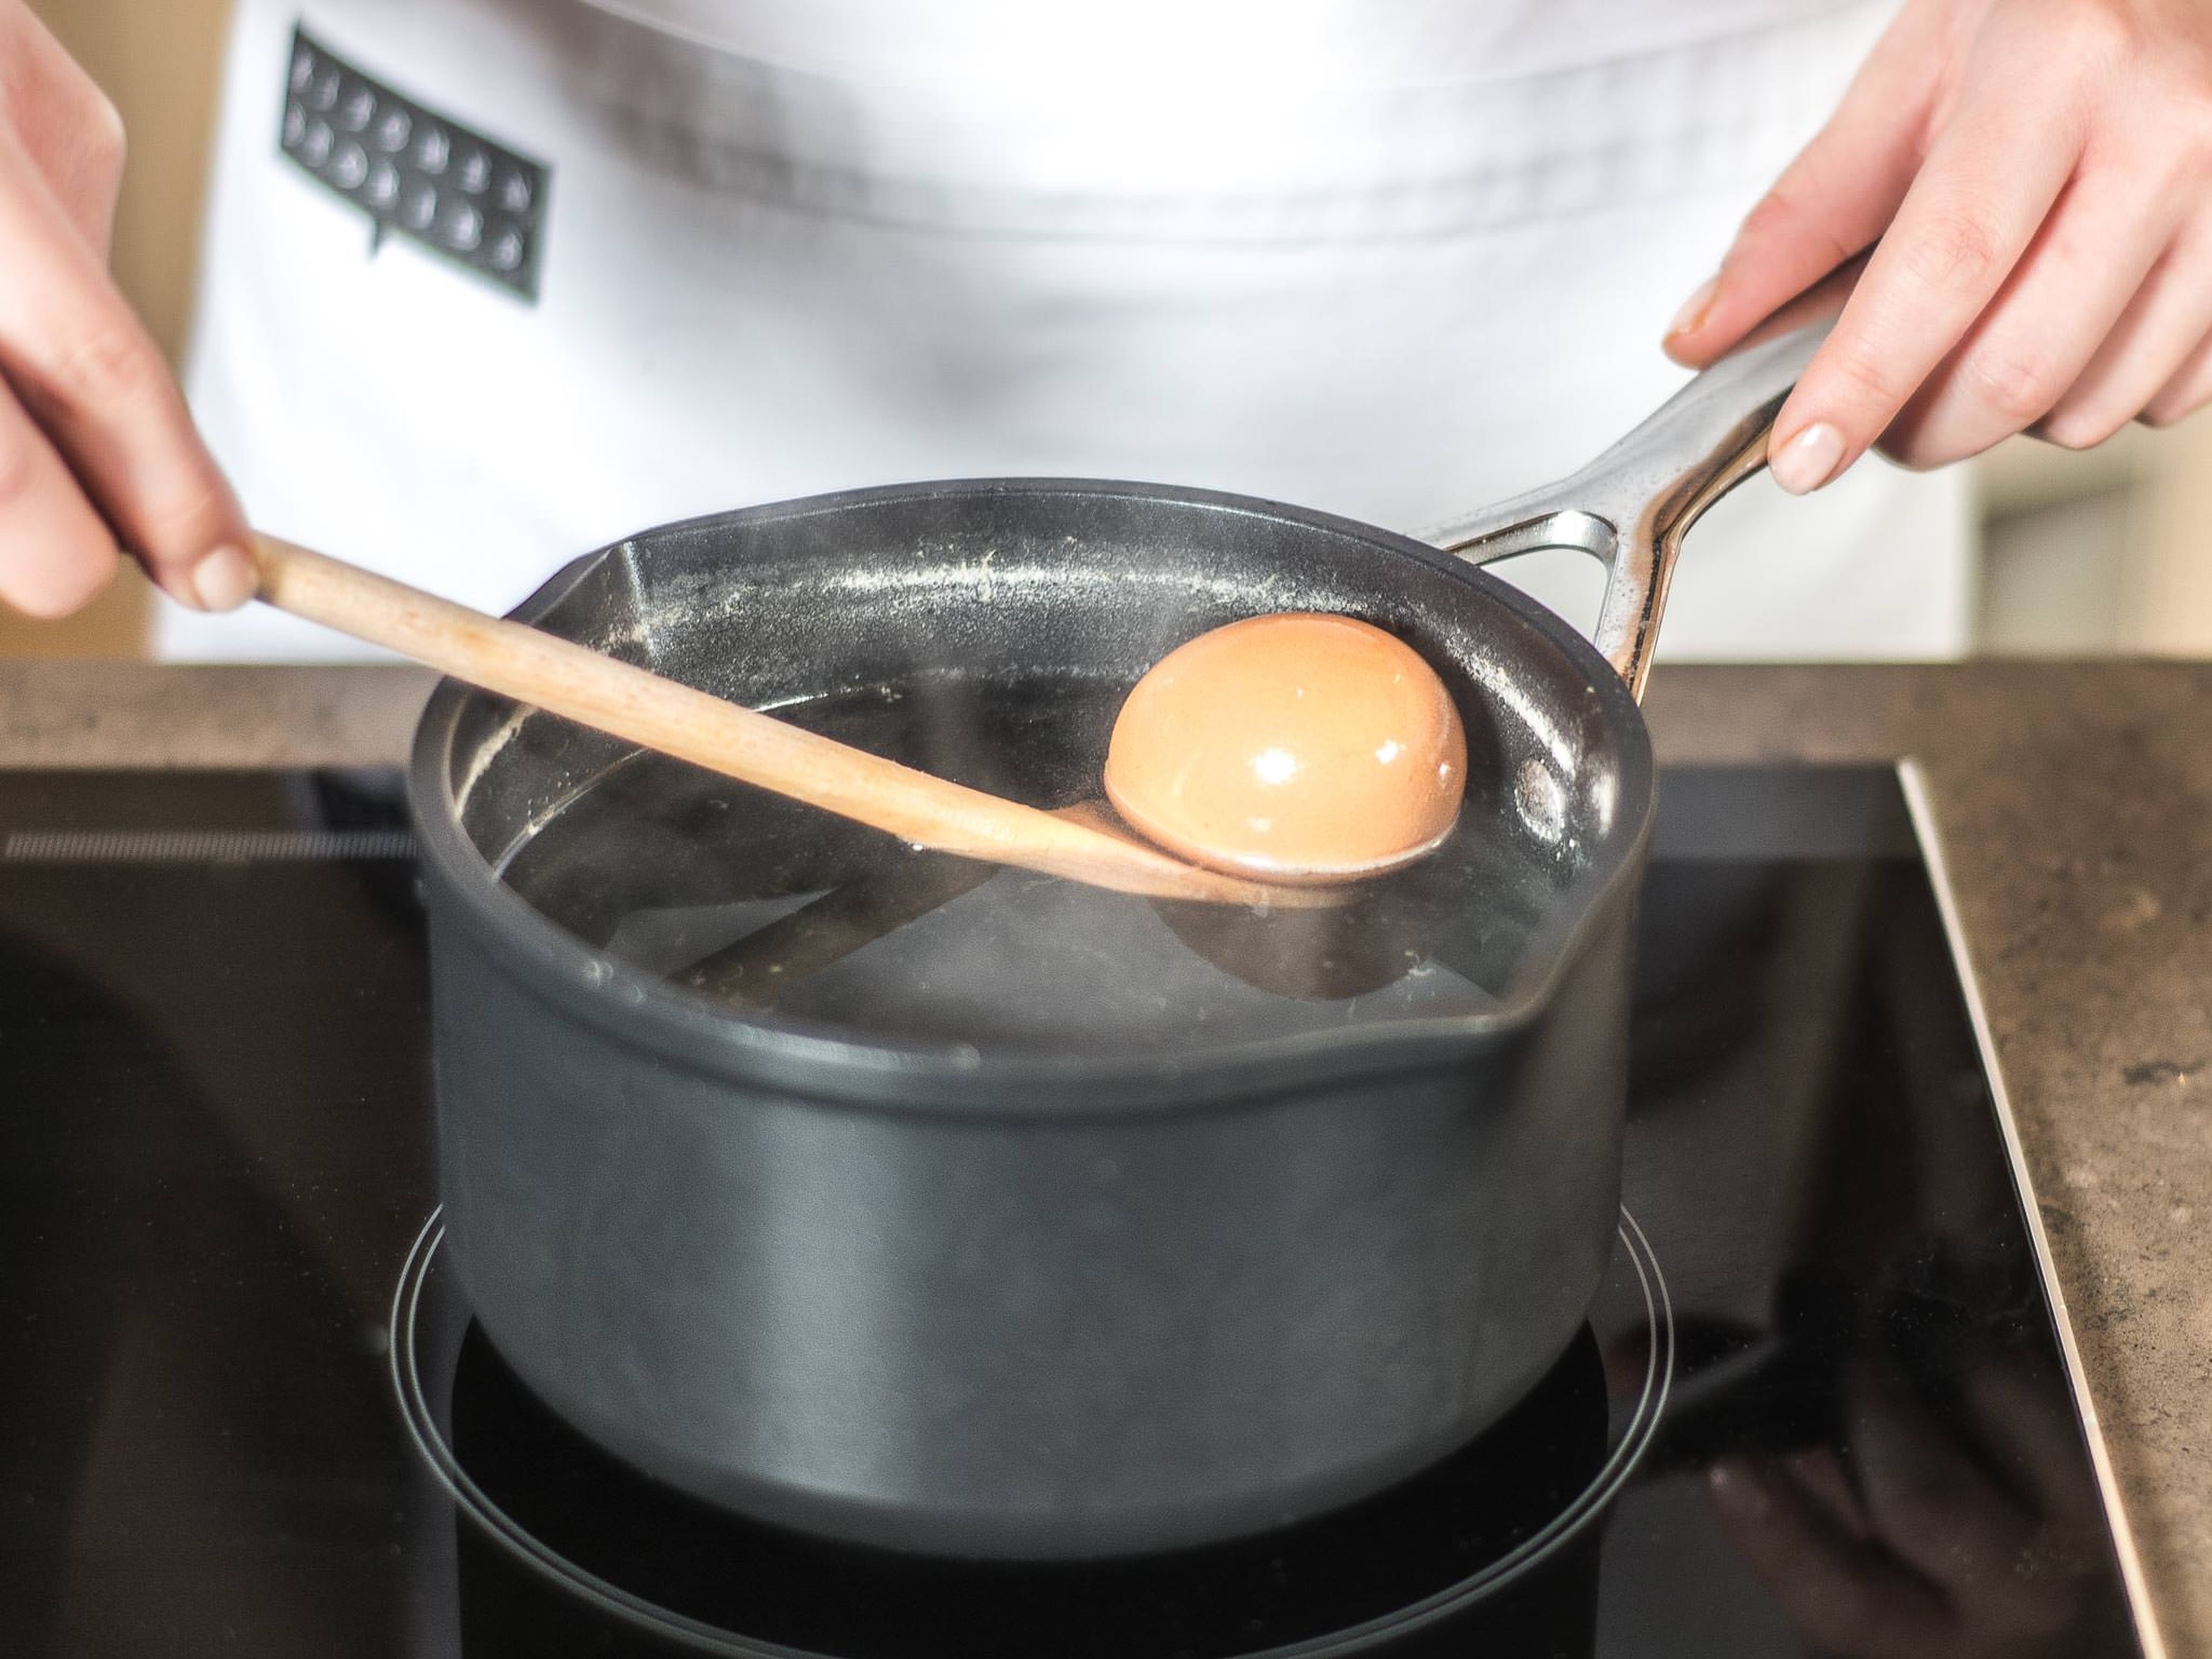 In a small sauce pan cook eggs for approx. 6 - 7 min. until soft-boiled.